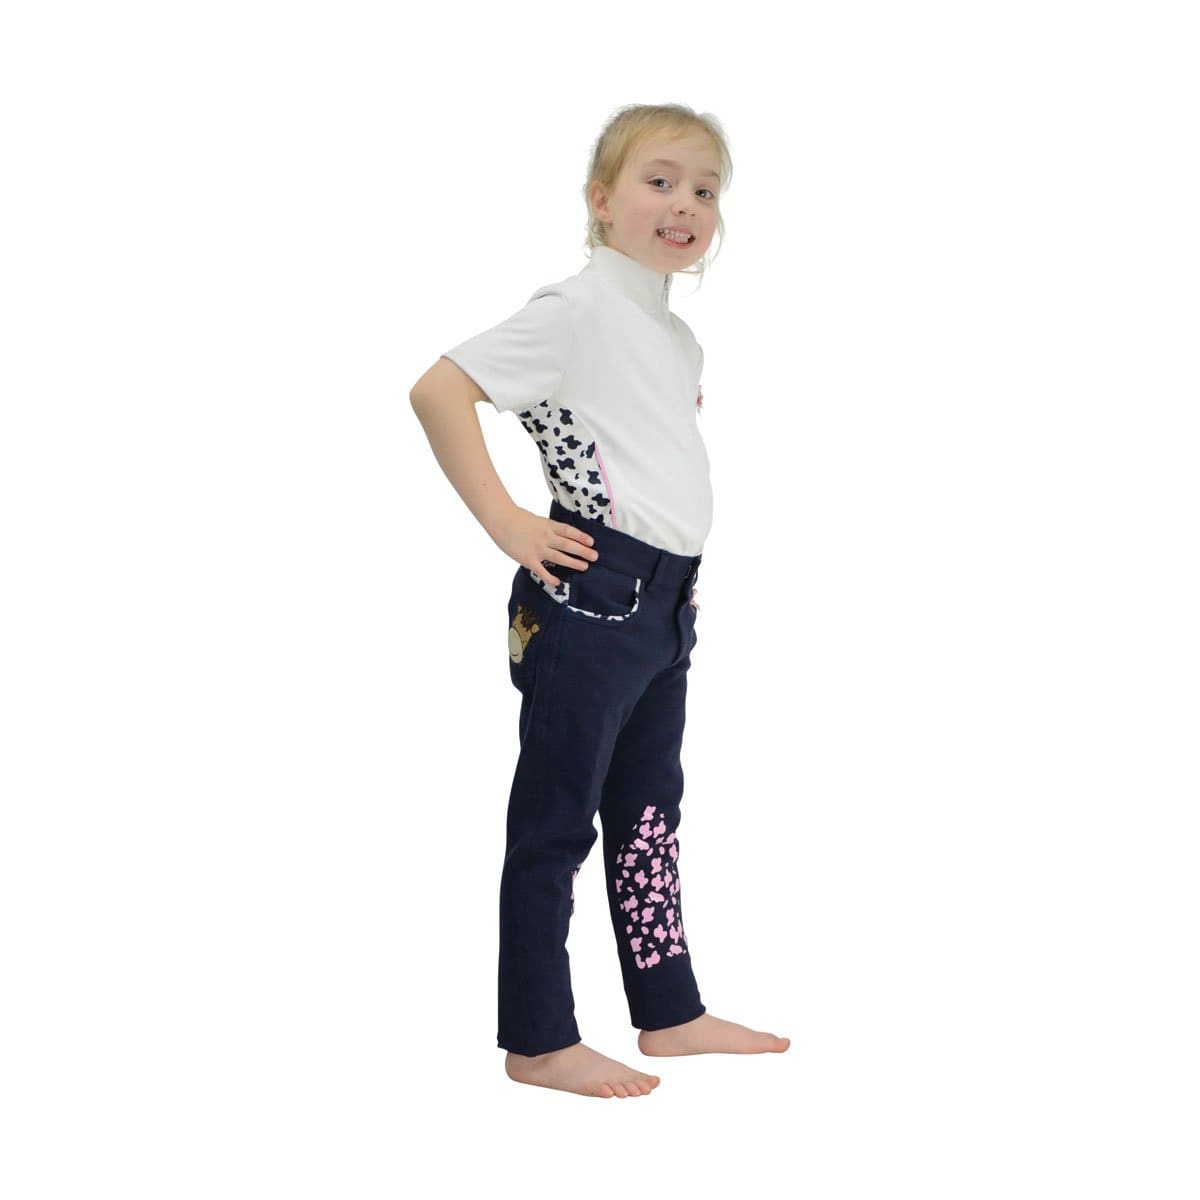 Chemise de spectacle Little Rider Molly Moo 